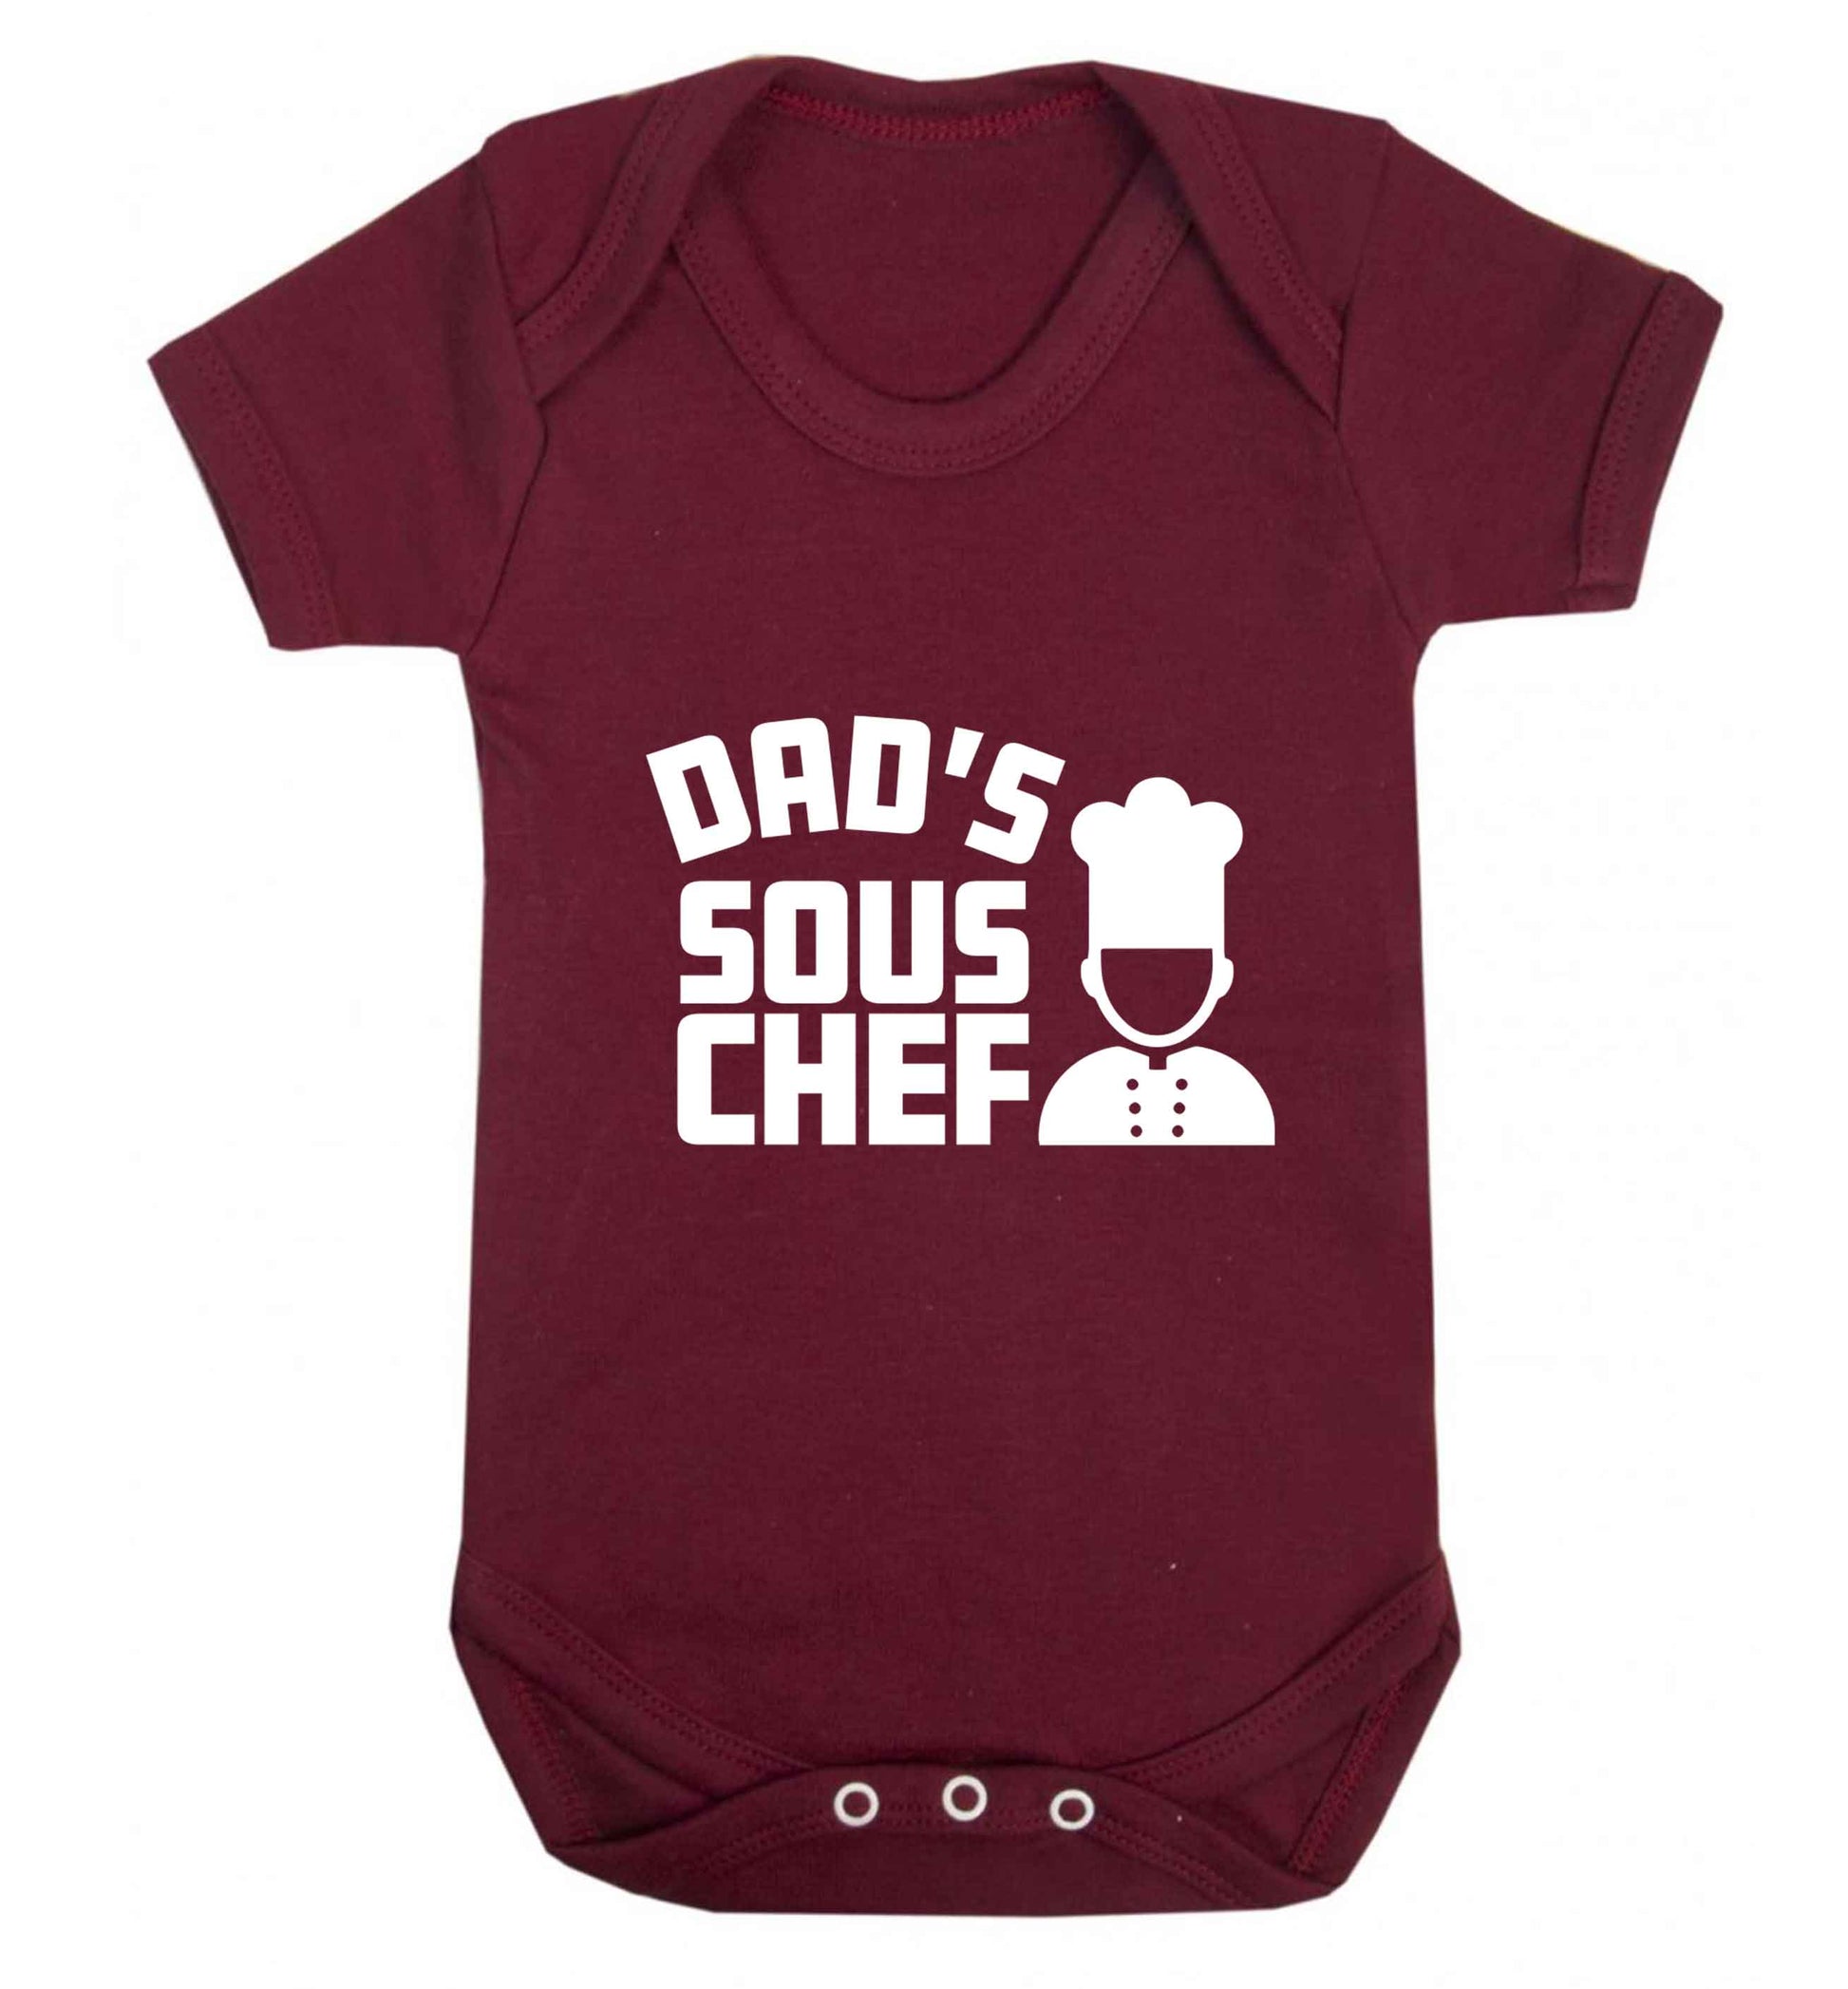 Dad's sous chef baby vest maroon 18-24 months